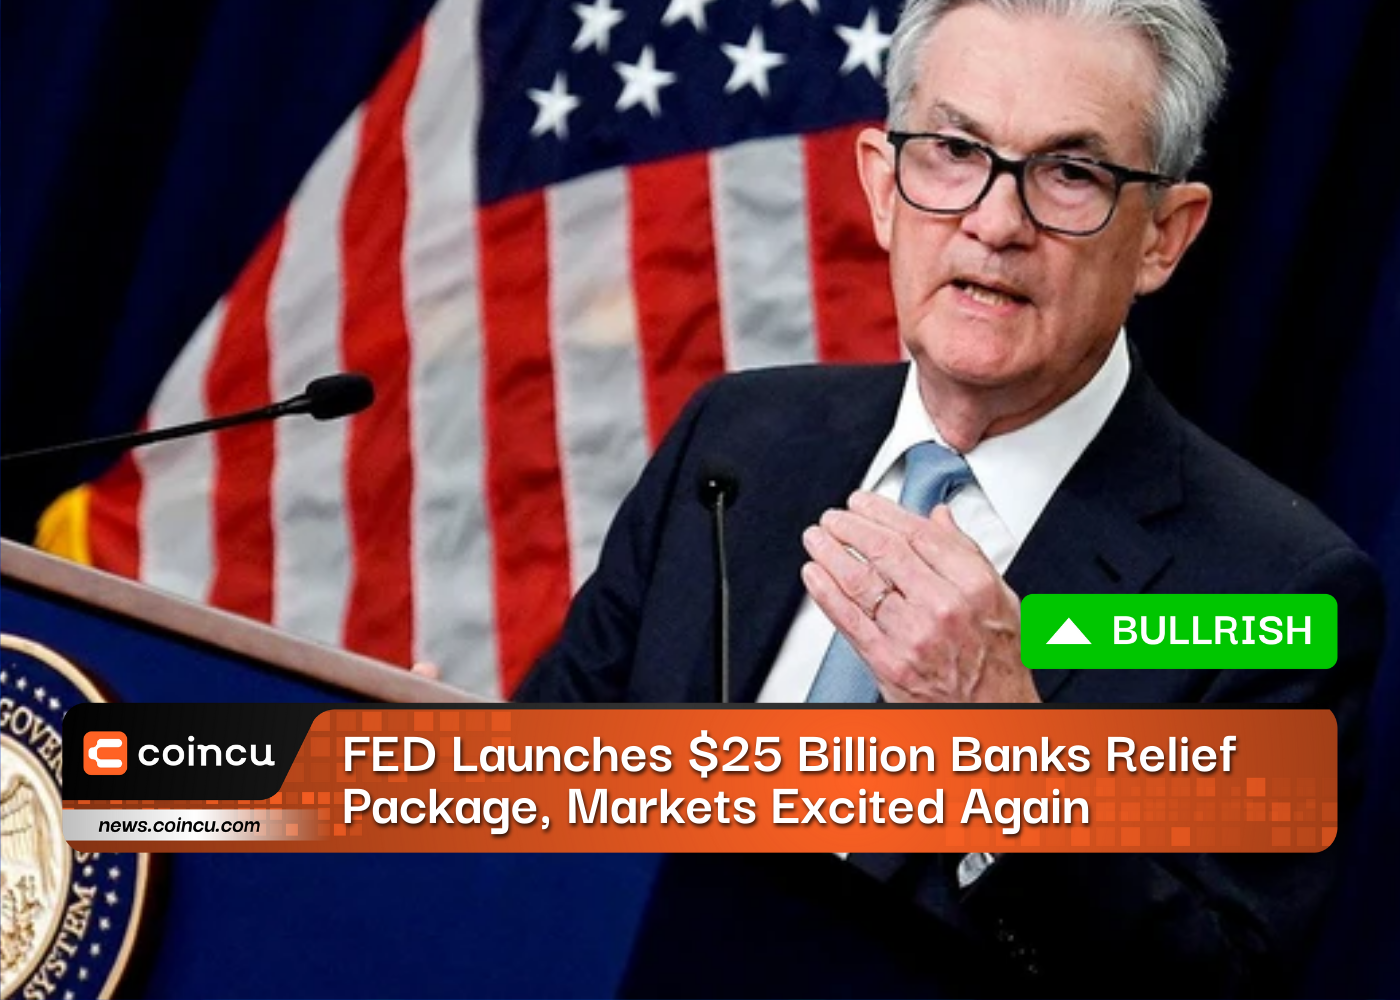 FED Launches $25 Billion Banks Relief Package, Markets Excited Again